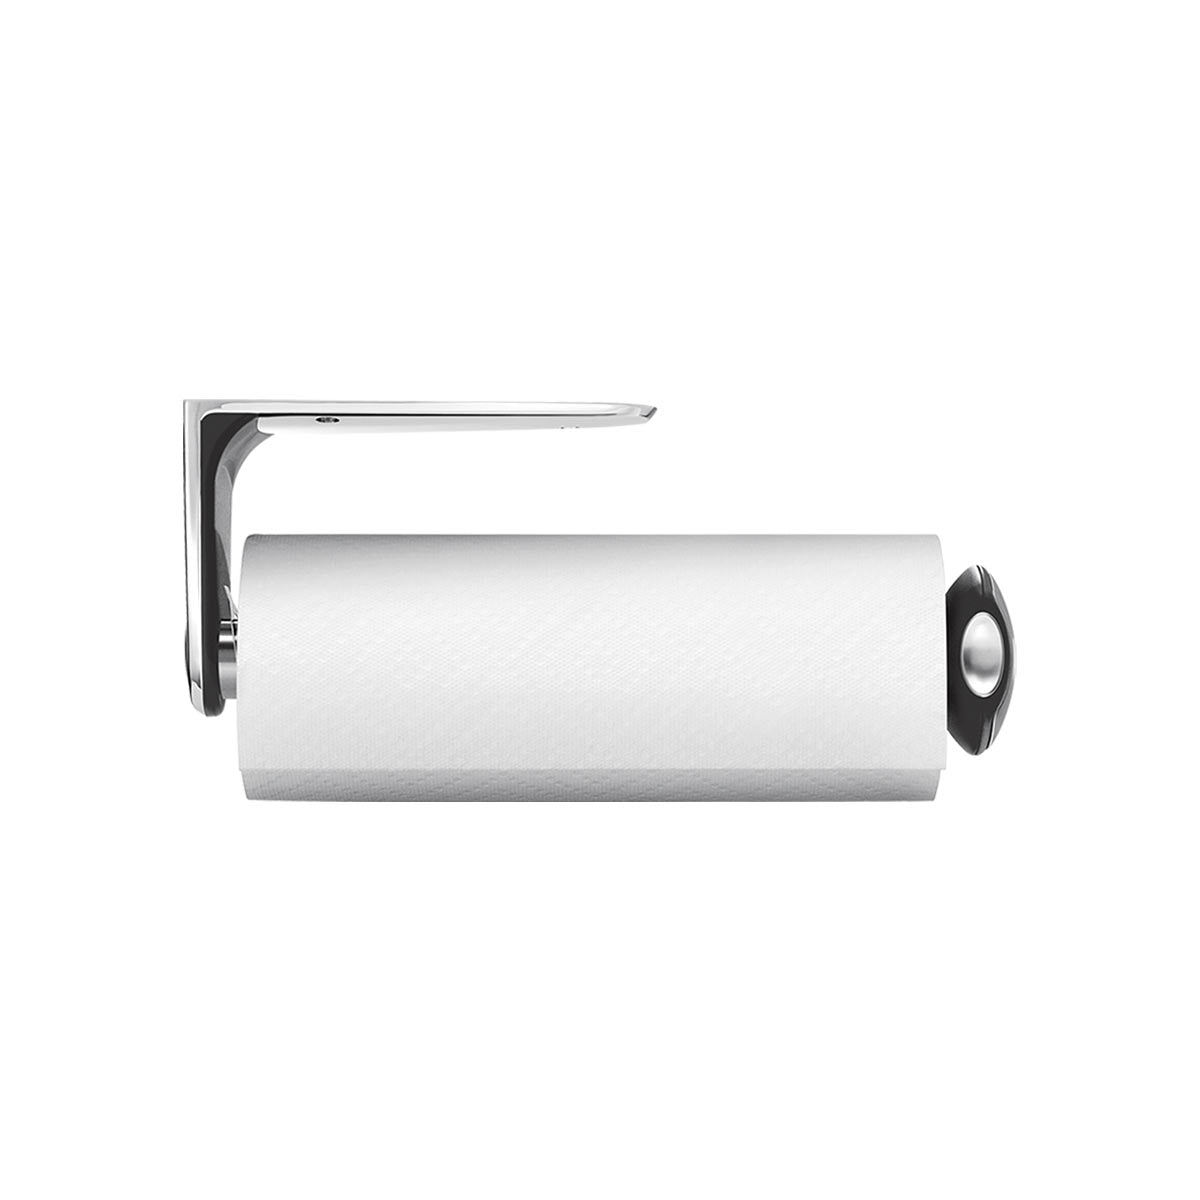 Black Cabinet Door-mounted Paper Towel Holder, Stainless Steel Spring  Loaded Kitchen Roll Hanger, Wall Mounted